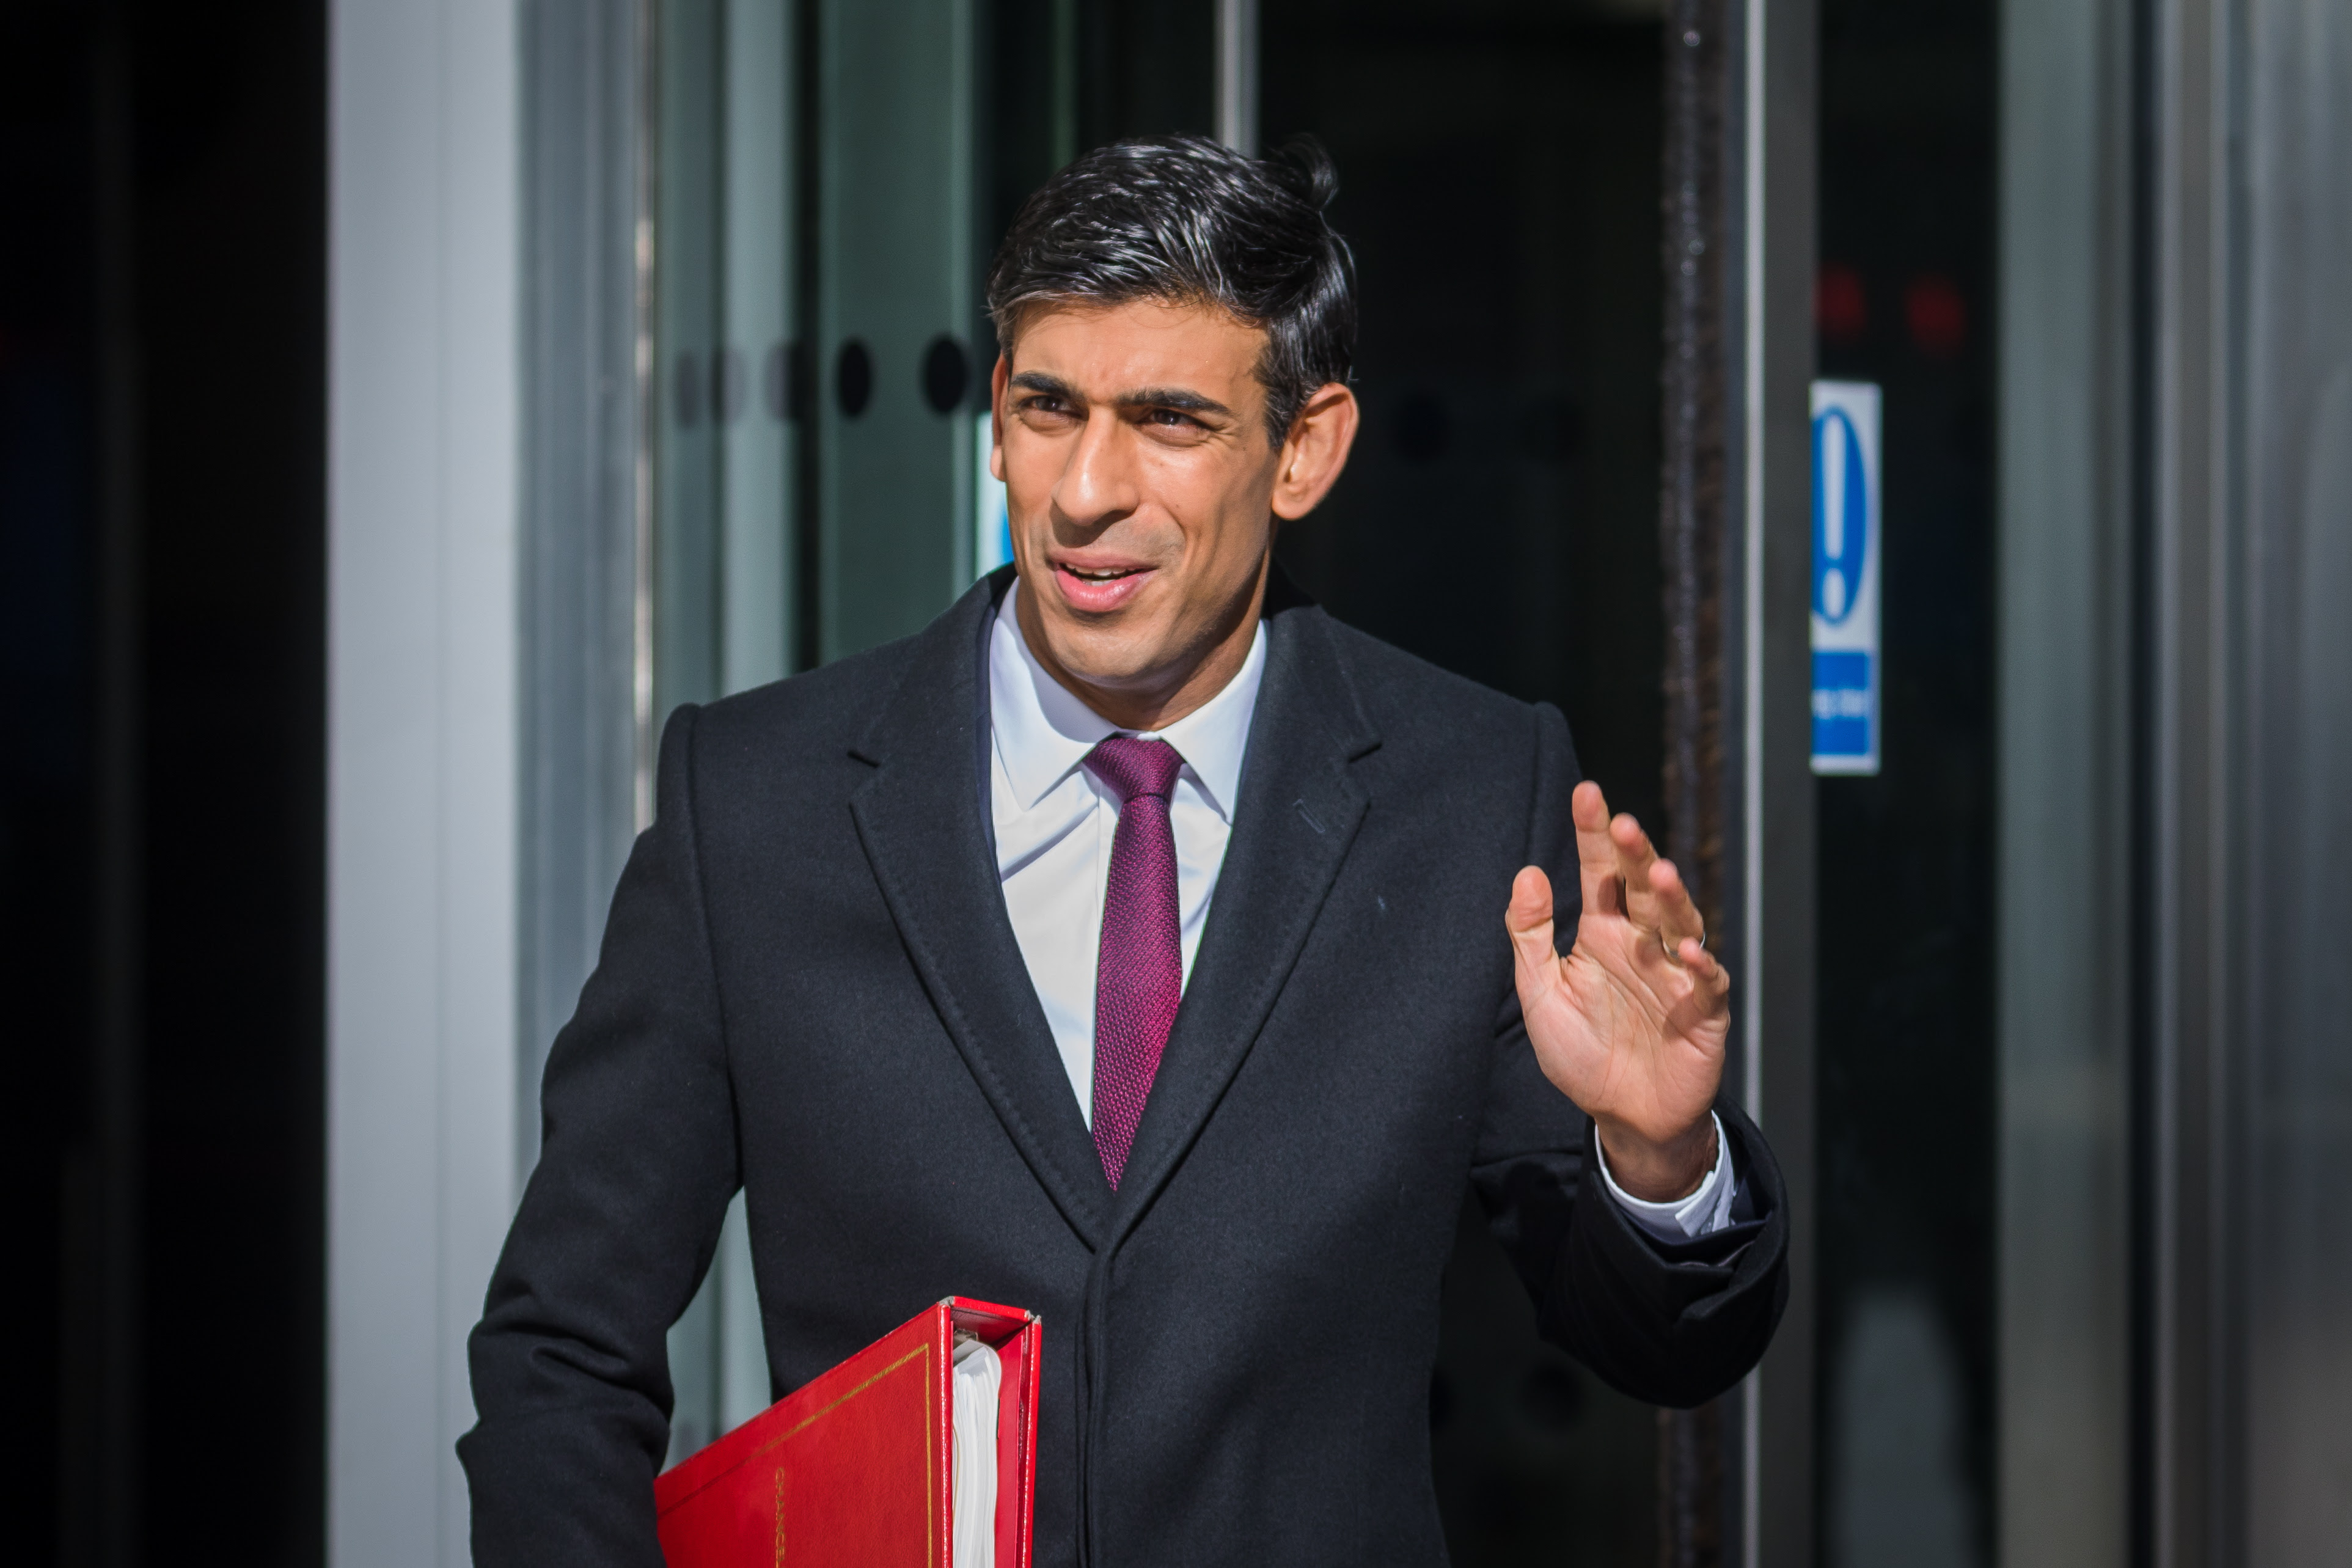  Chancellor Rishi Sunak will give companies a big tax break if they hire forces veterans in a bid to get more straight into work